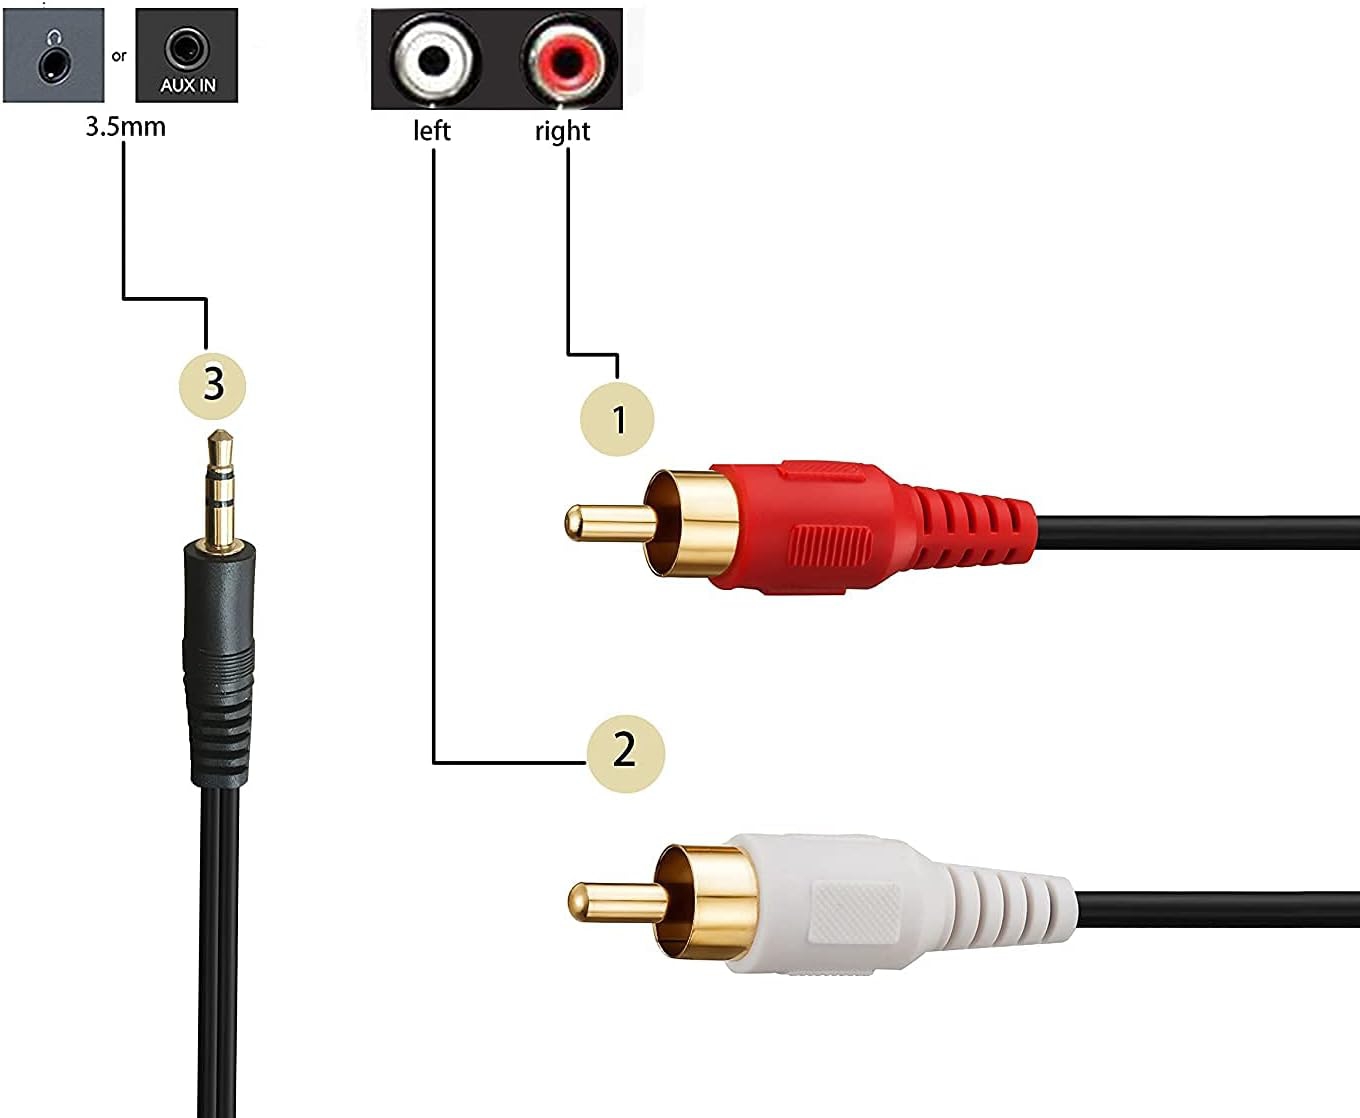 3.5 mm Jack Stereo Audio Male to 2 RCA Male Cable for Tablet, Smartphone